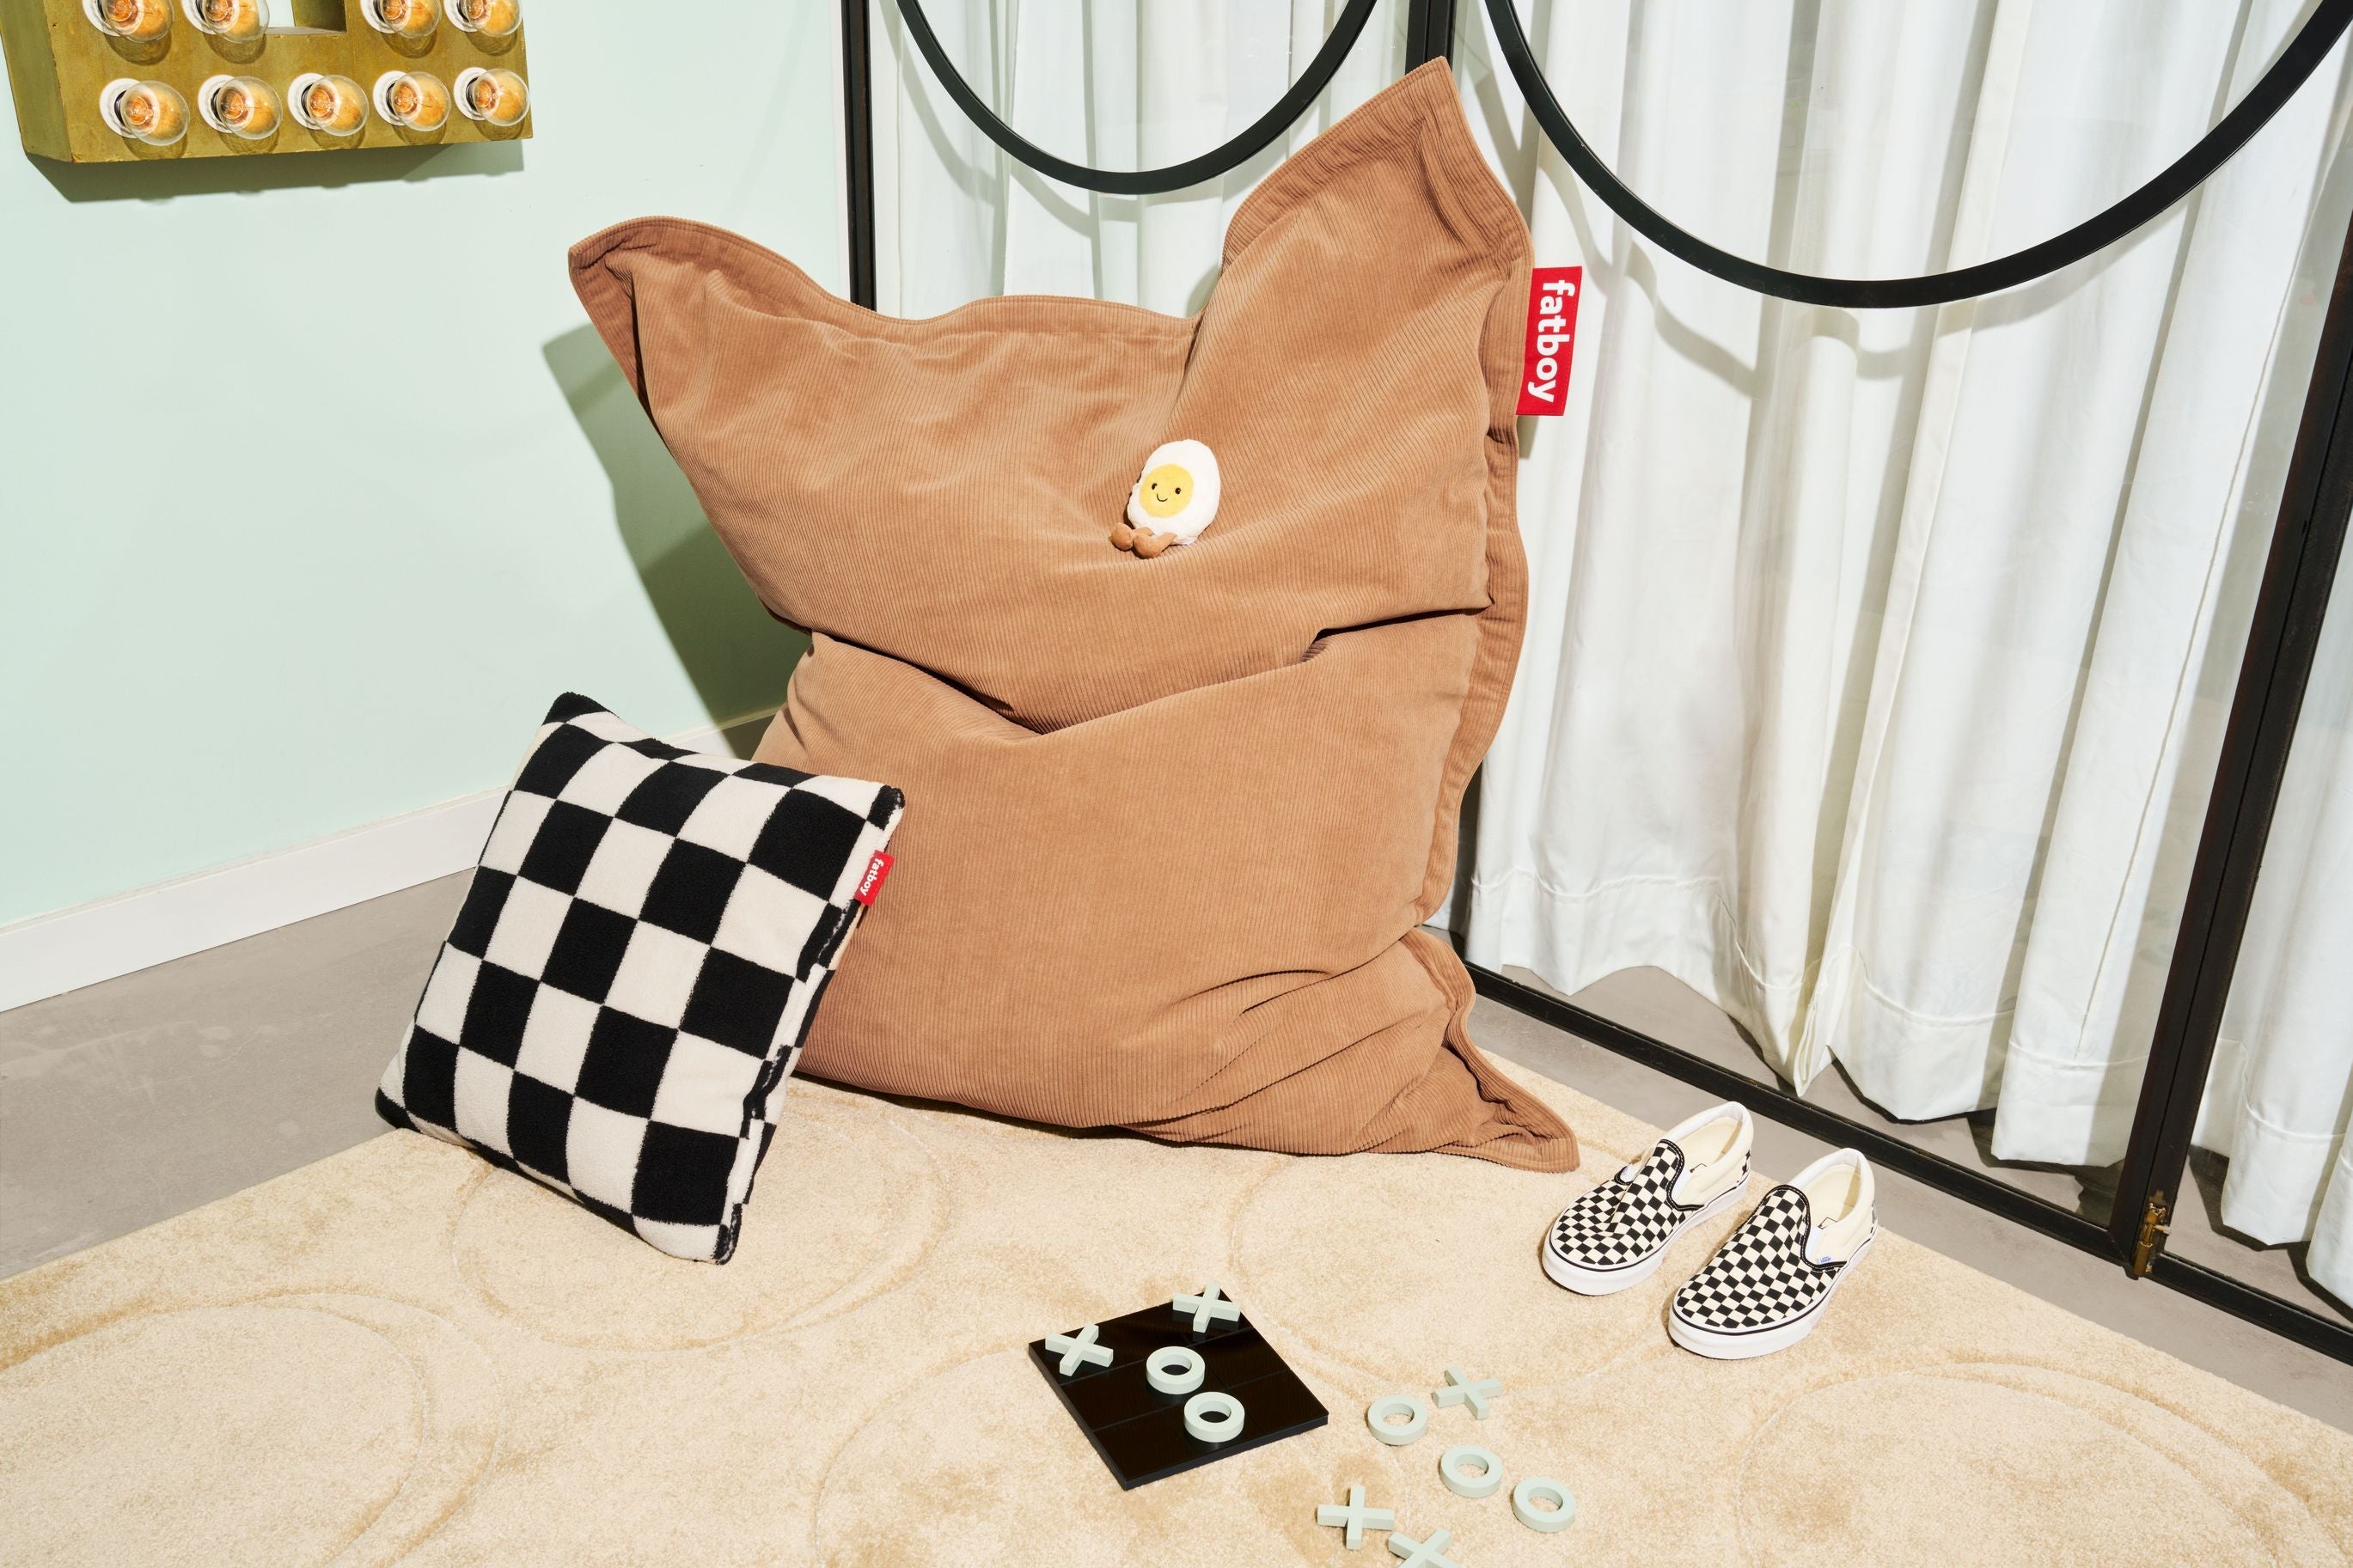 Fatboy Square Pillow Teddy Chess, Brown